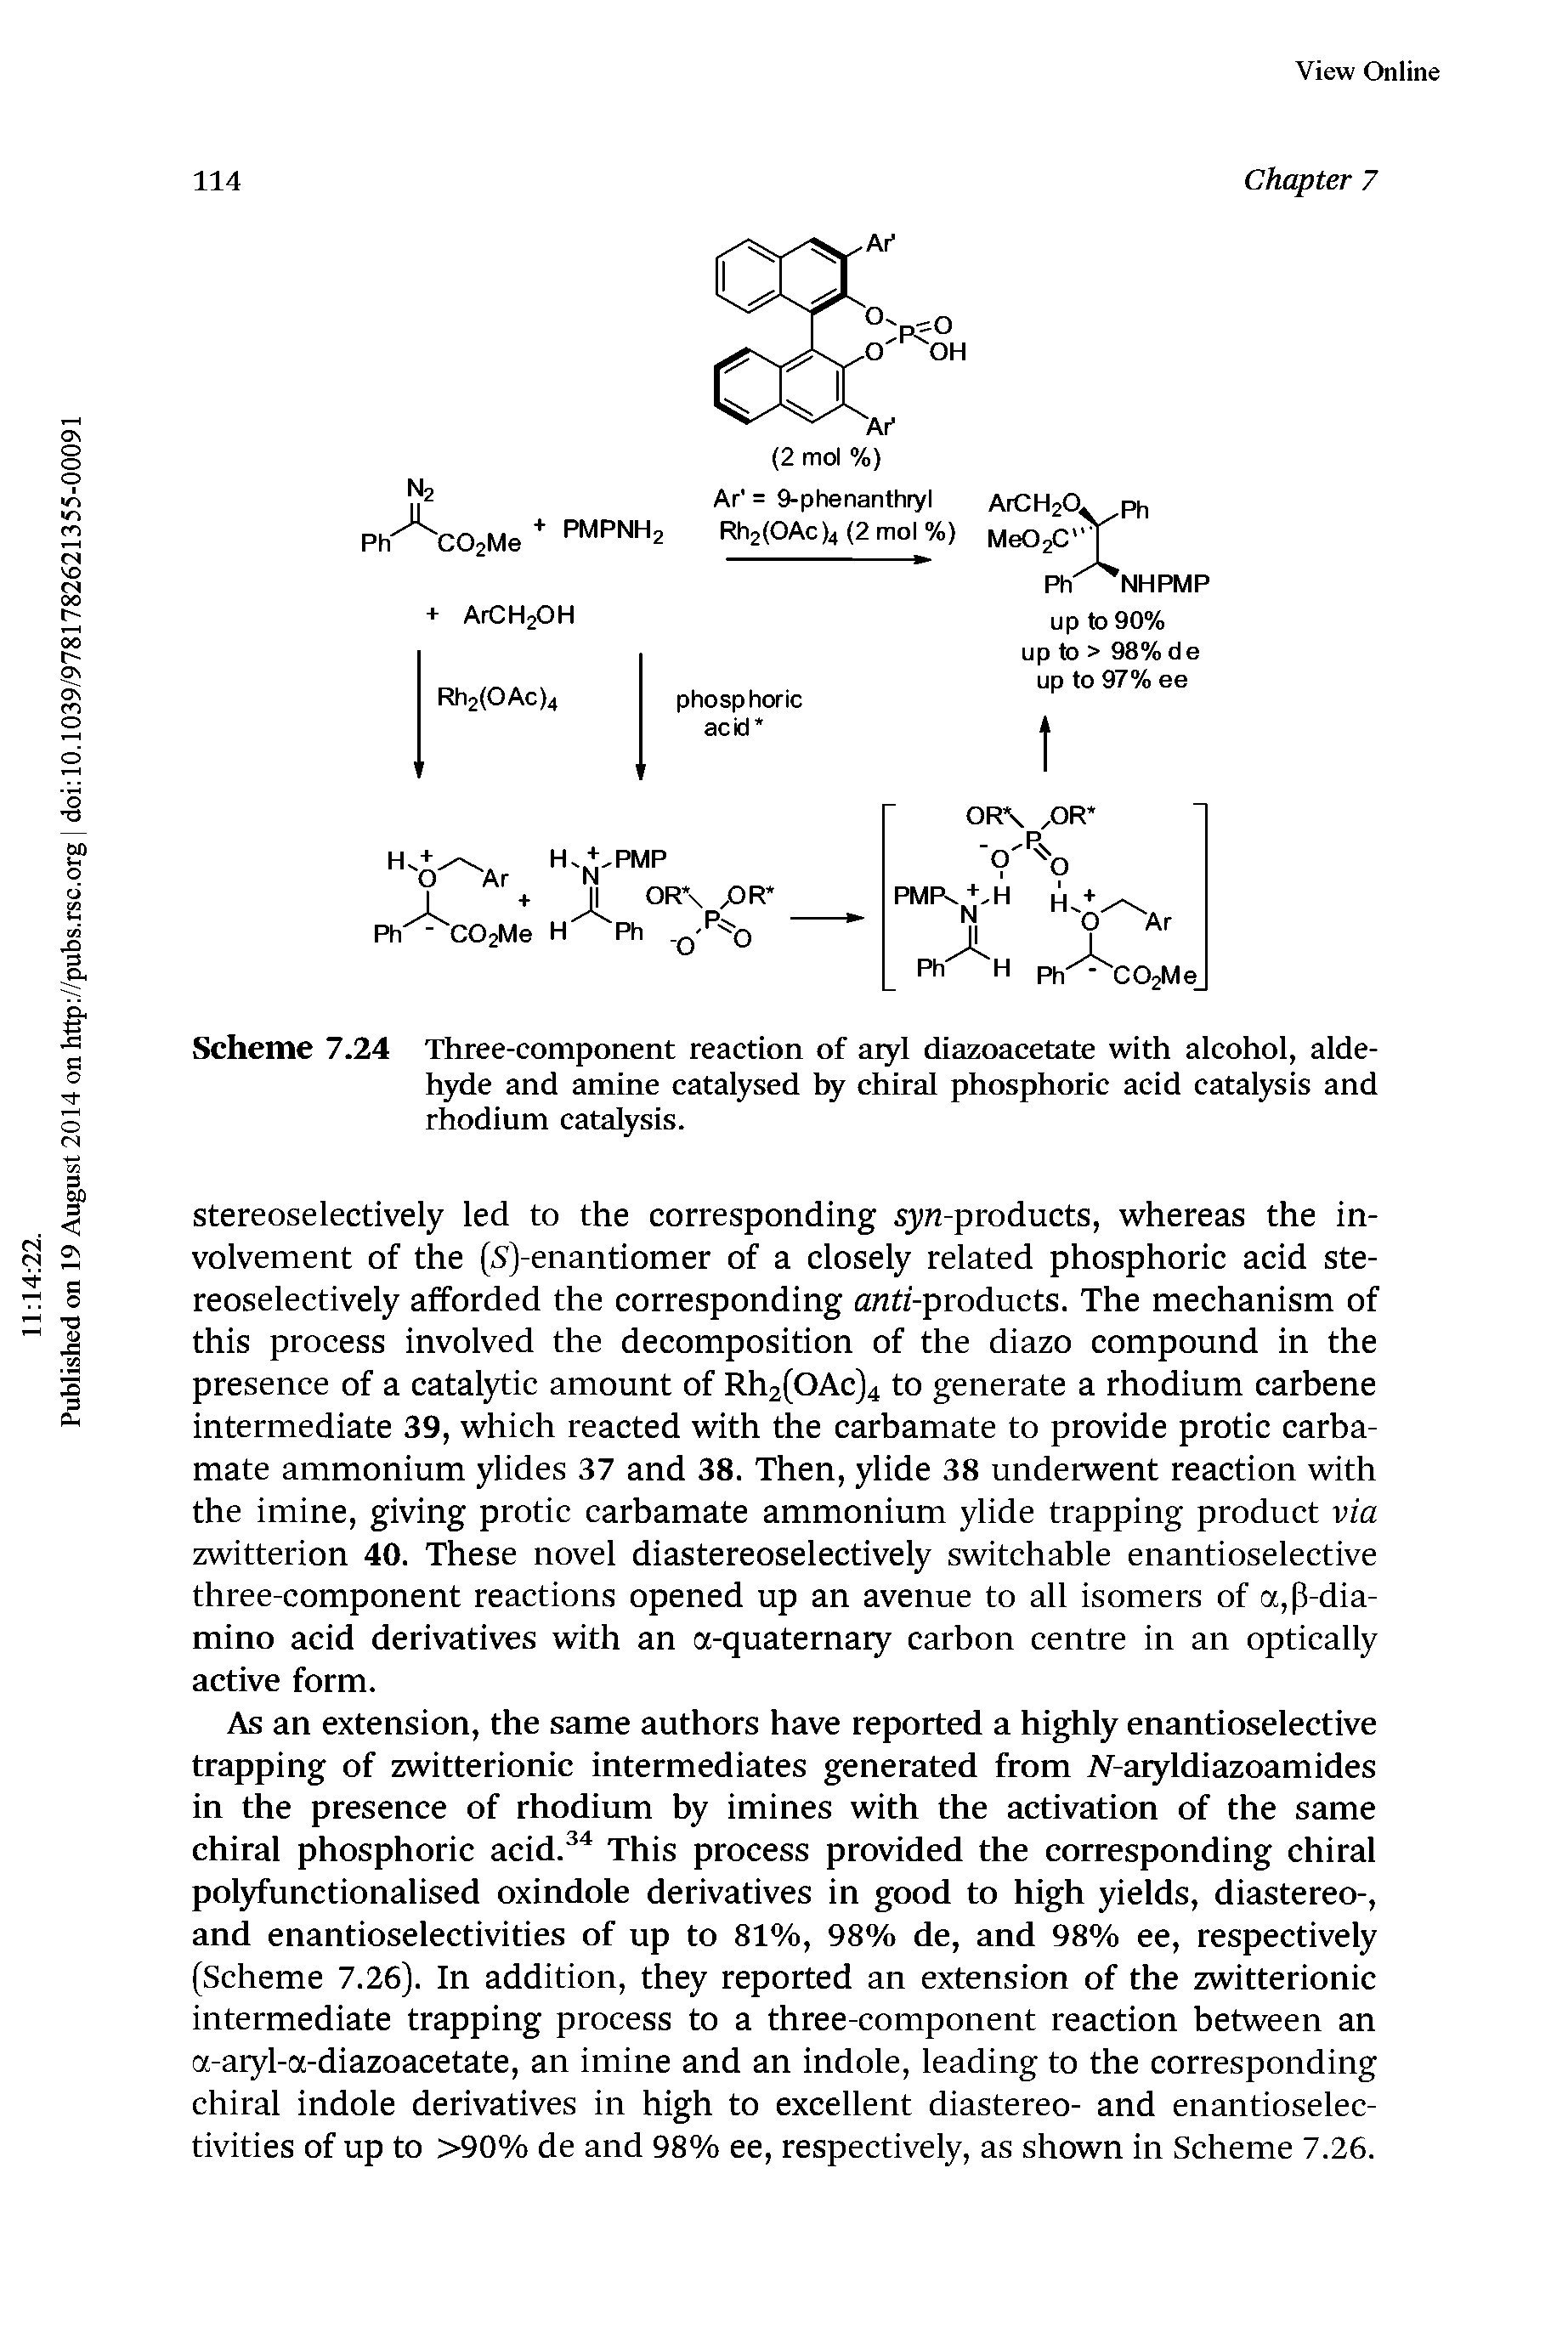 Scheme 7.24 Three-component reaction of aiyl diazoacetate with alcohol, aldehyde and amine catalysed hy chiral phosphoric acid catalysis and rhodium catalysis.